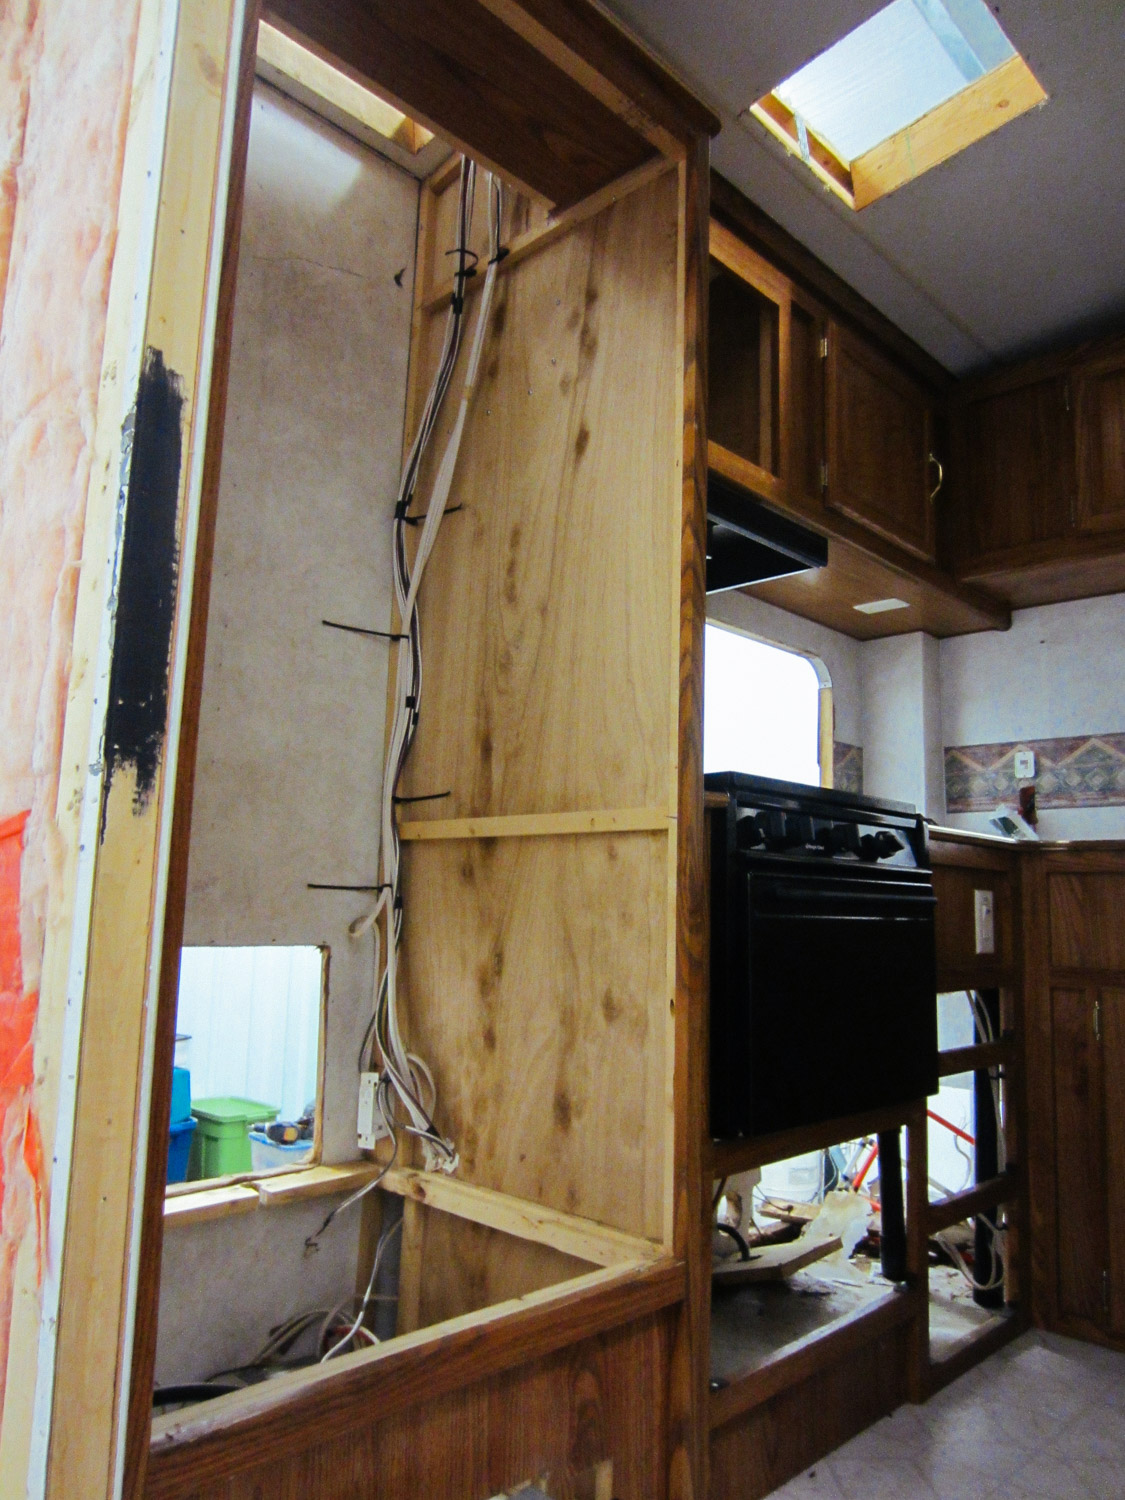  Since we were going to put in a residential fridge, we removed original cabinetry that held the RV fridge. 